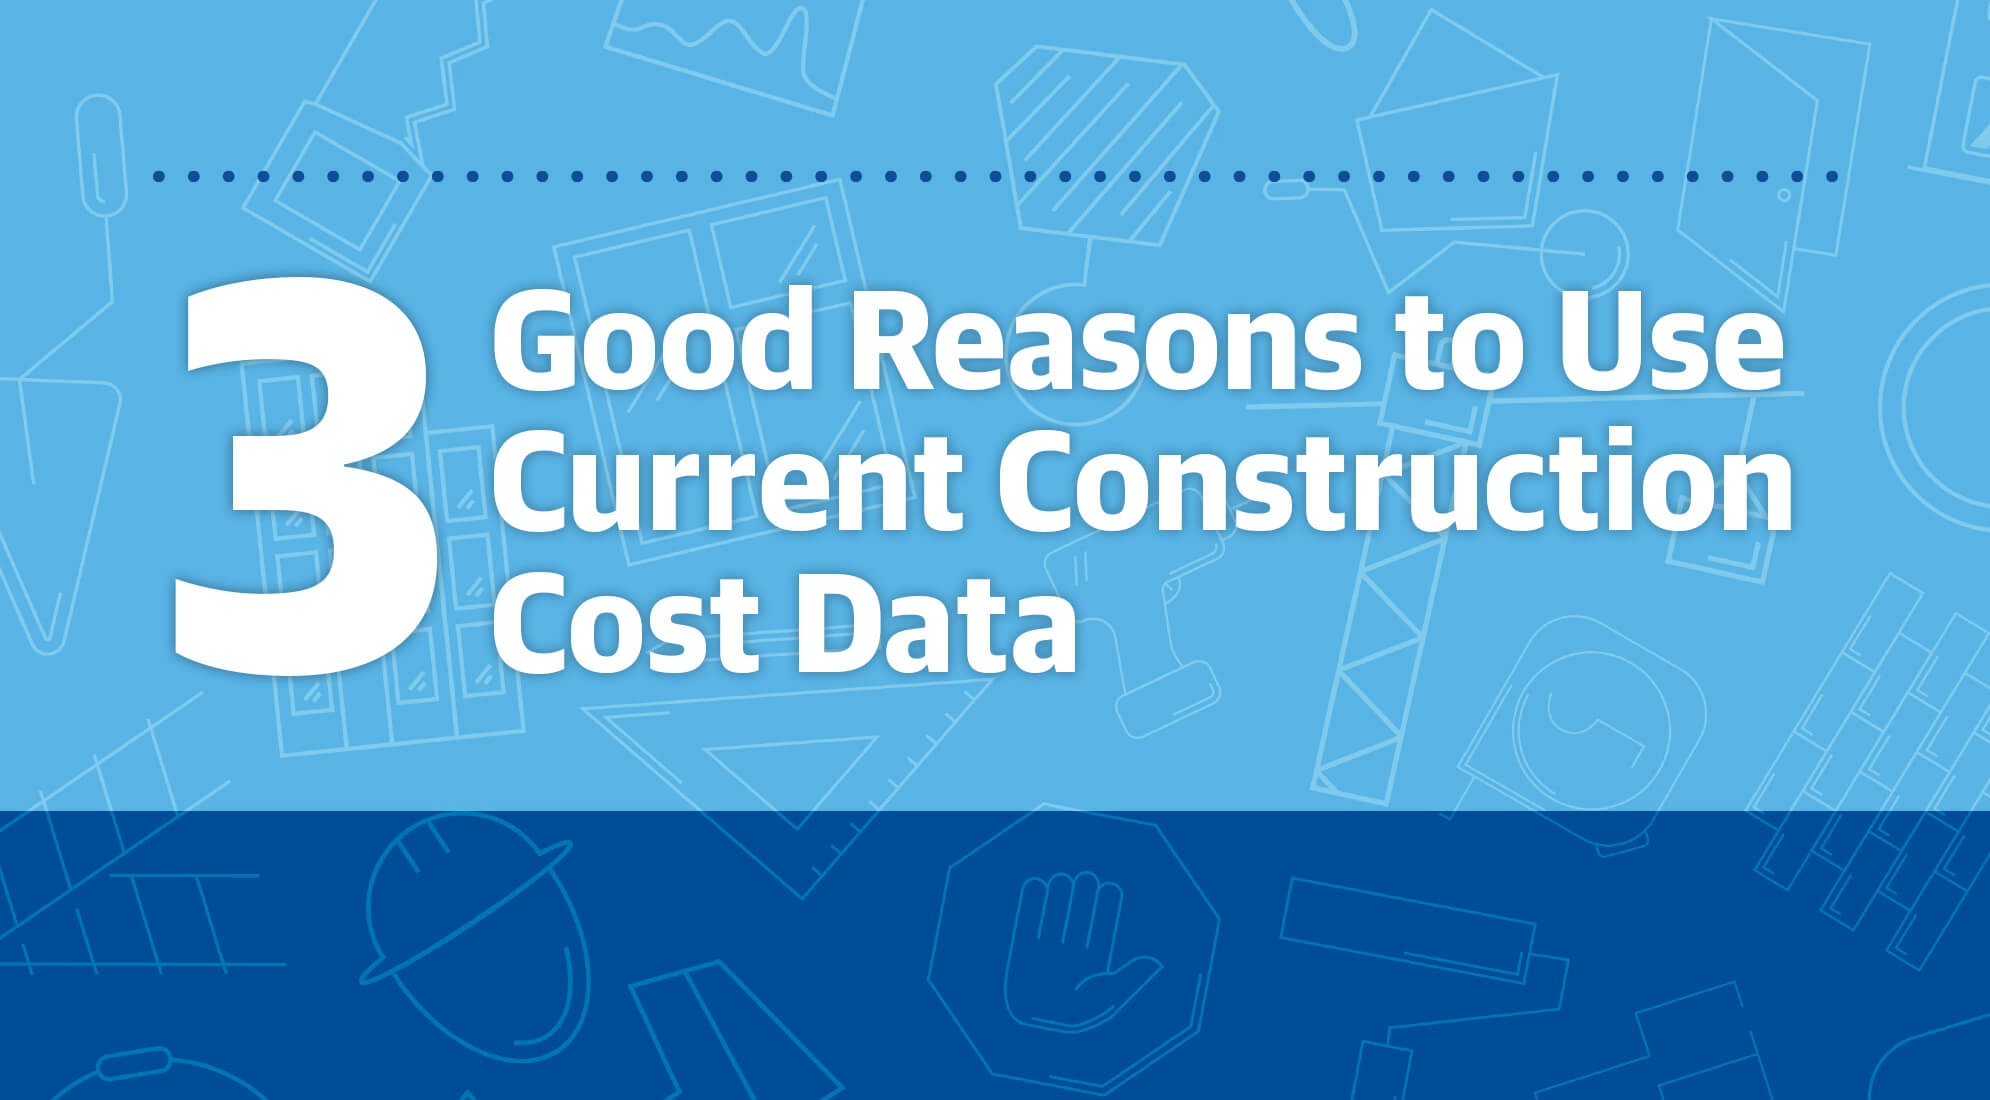 3 Good Reasons to Use Current Construction Cost Data 1